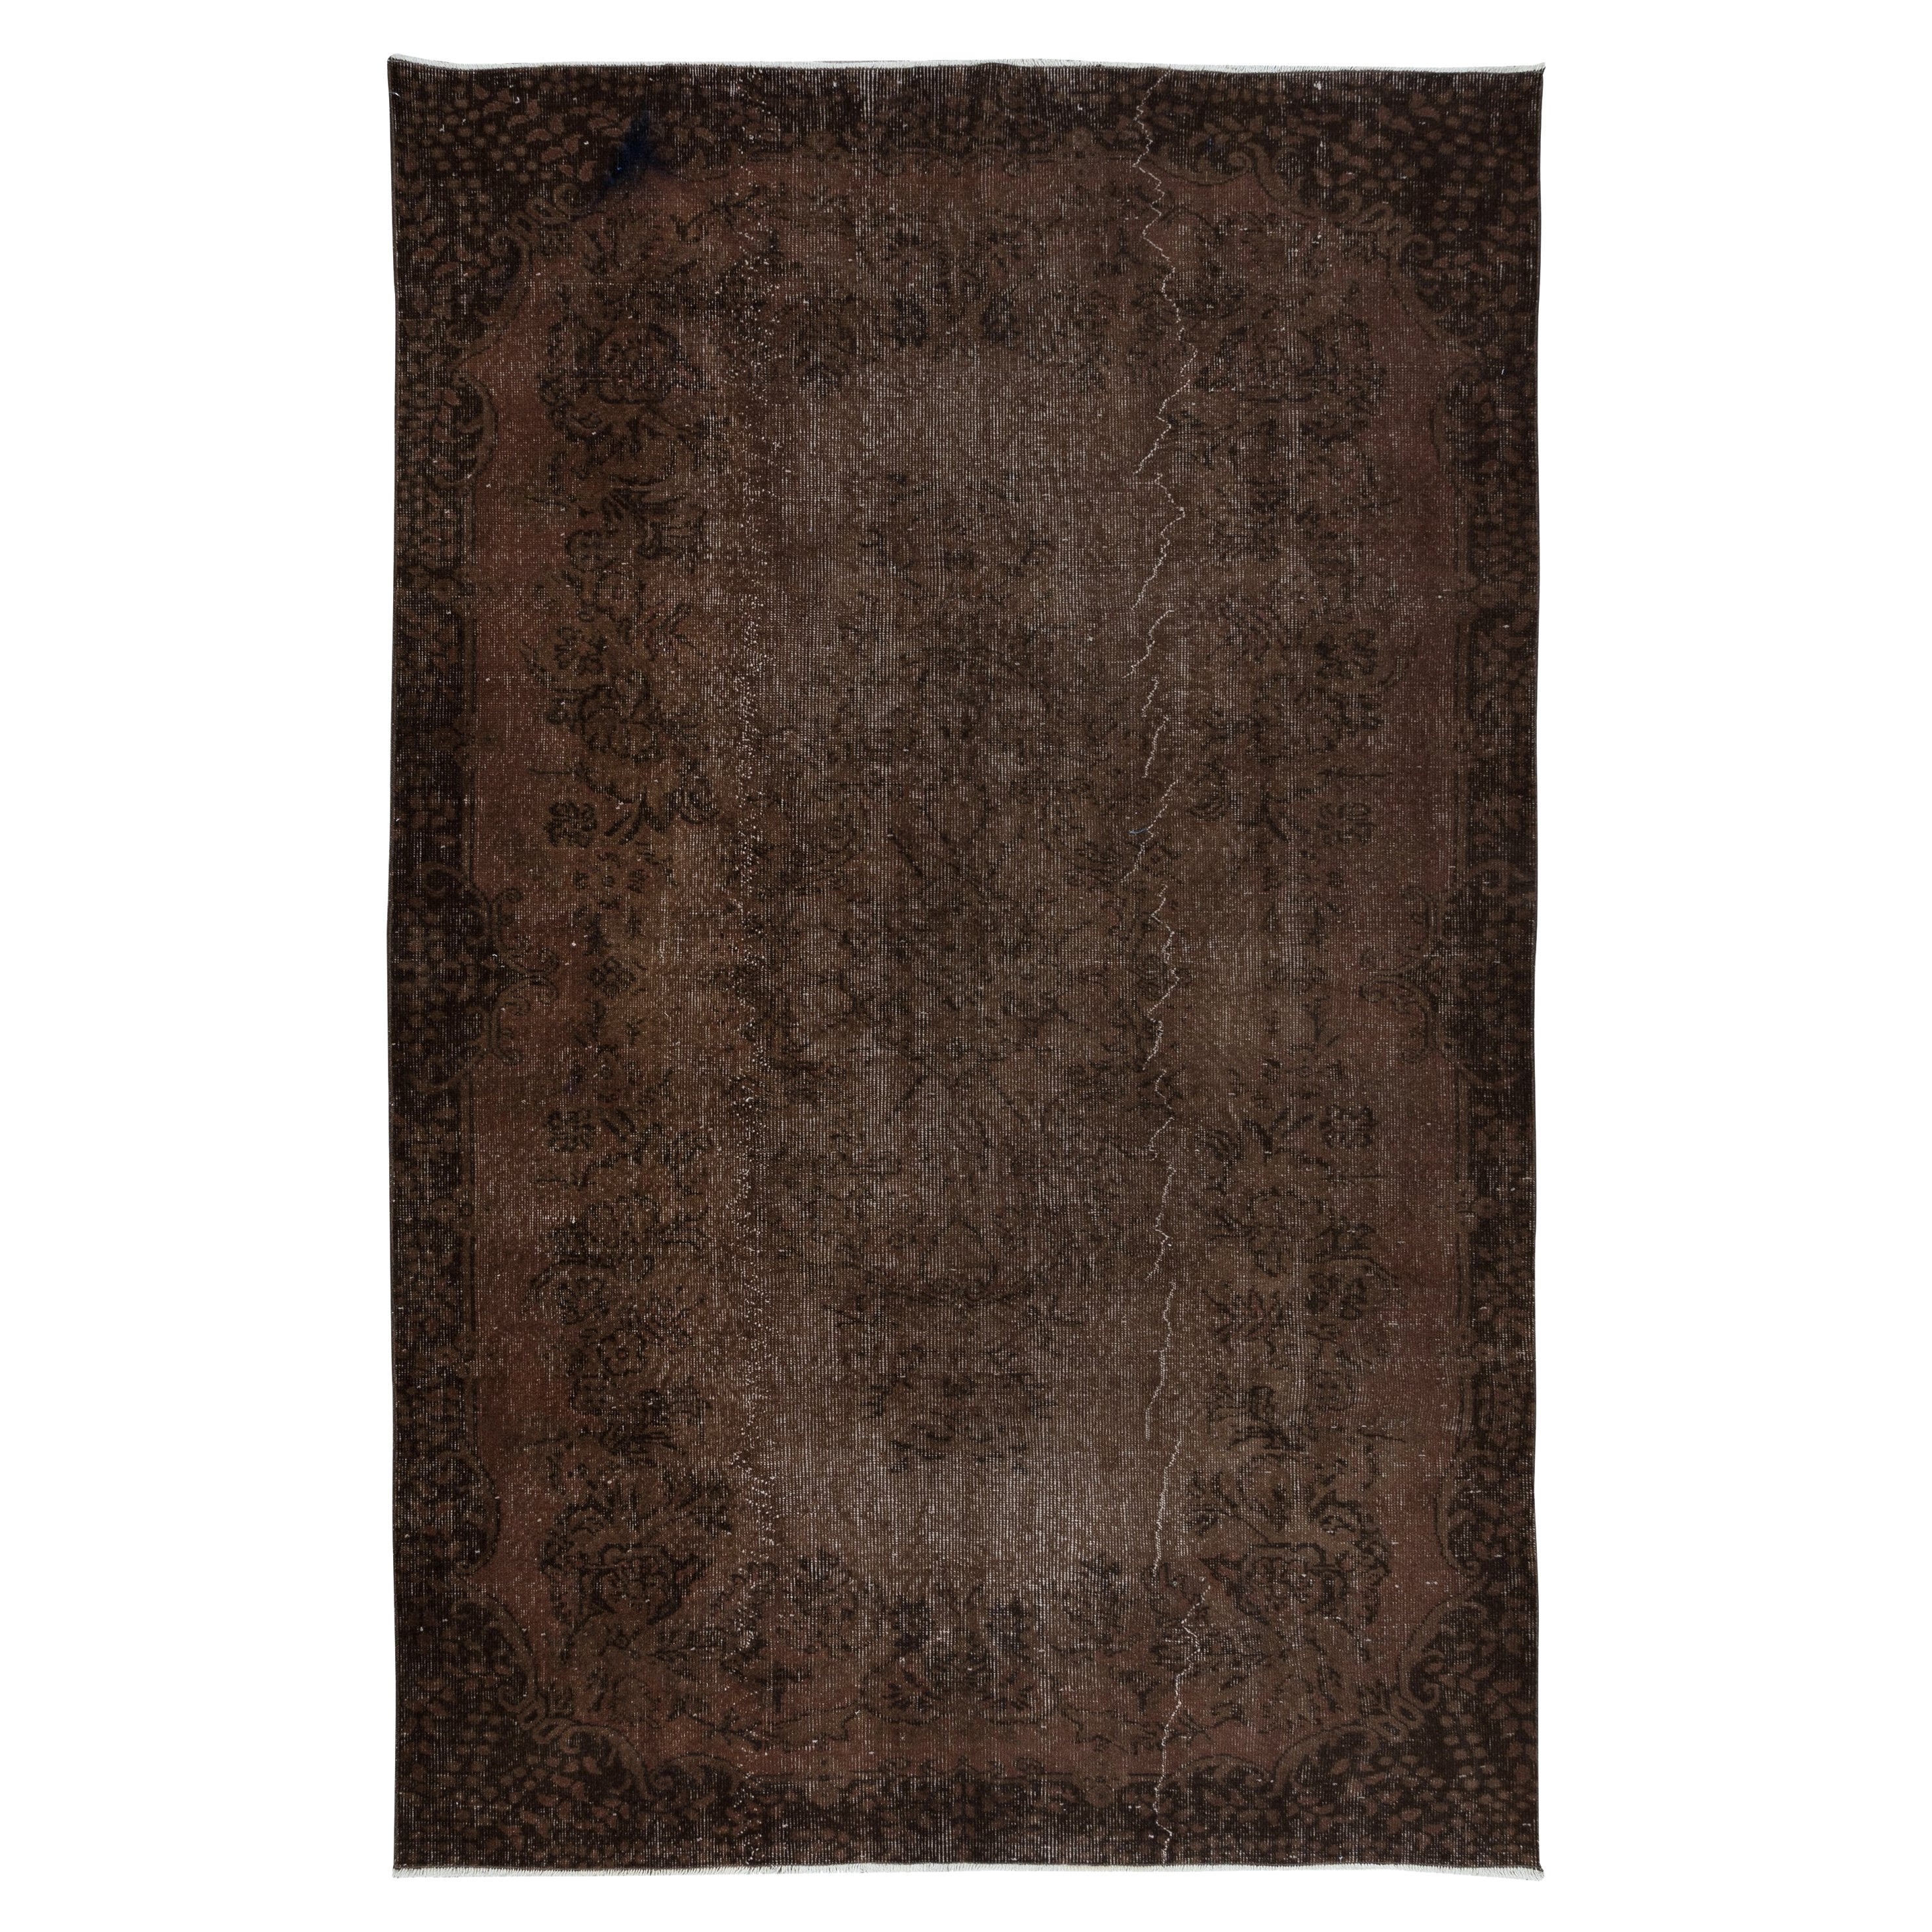 6x9.4 Ft Brown Wool Area Rug, Hand Knotted in Turkey, Great 4 Modern Interiors